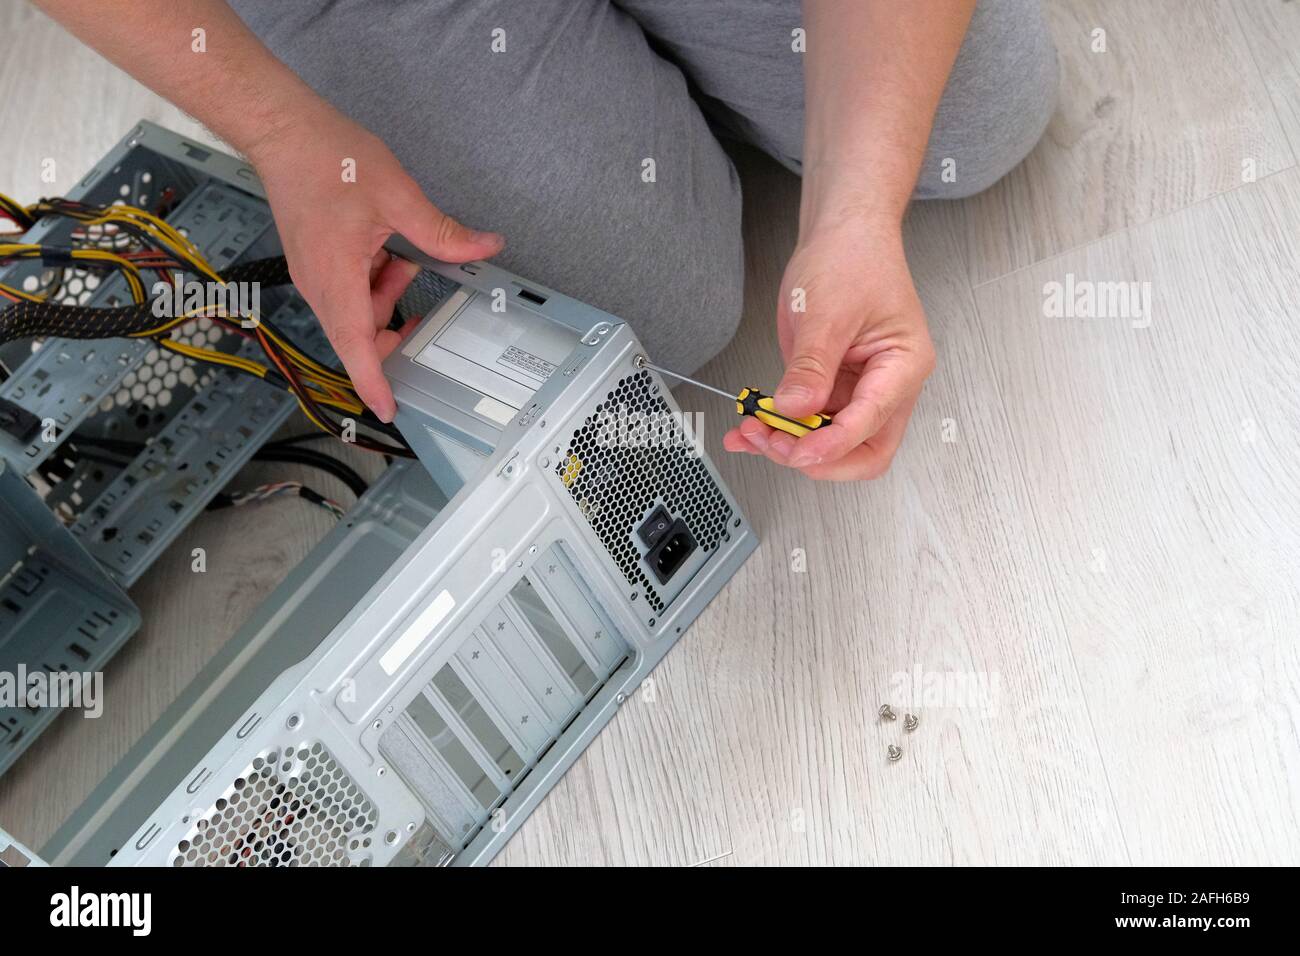 Computer engineer hold screwdriver for repairing PC. Service electronics and computers concept. Stock Photo